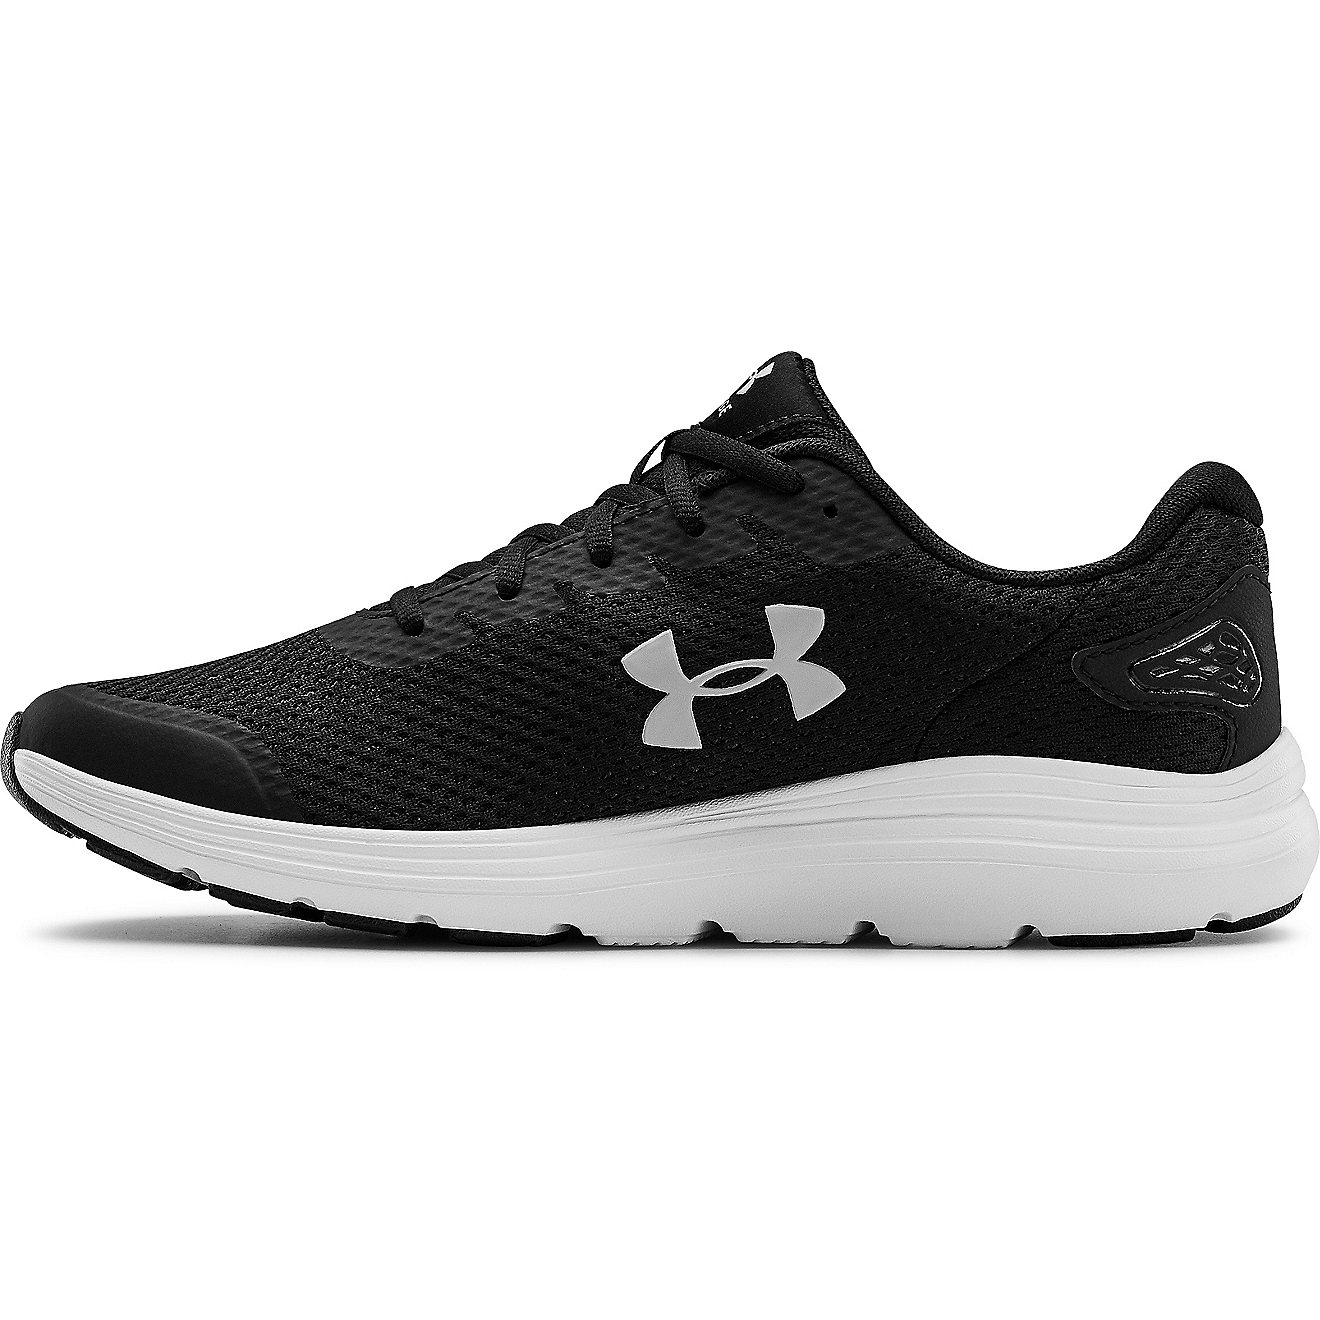 Under Armour Men's Surge 2 Running Shoes                                                                                         - view number 3